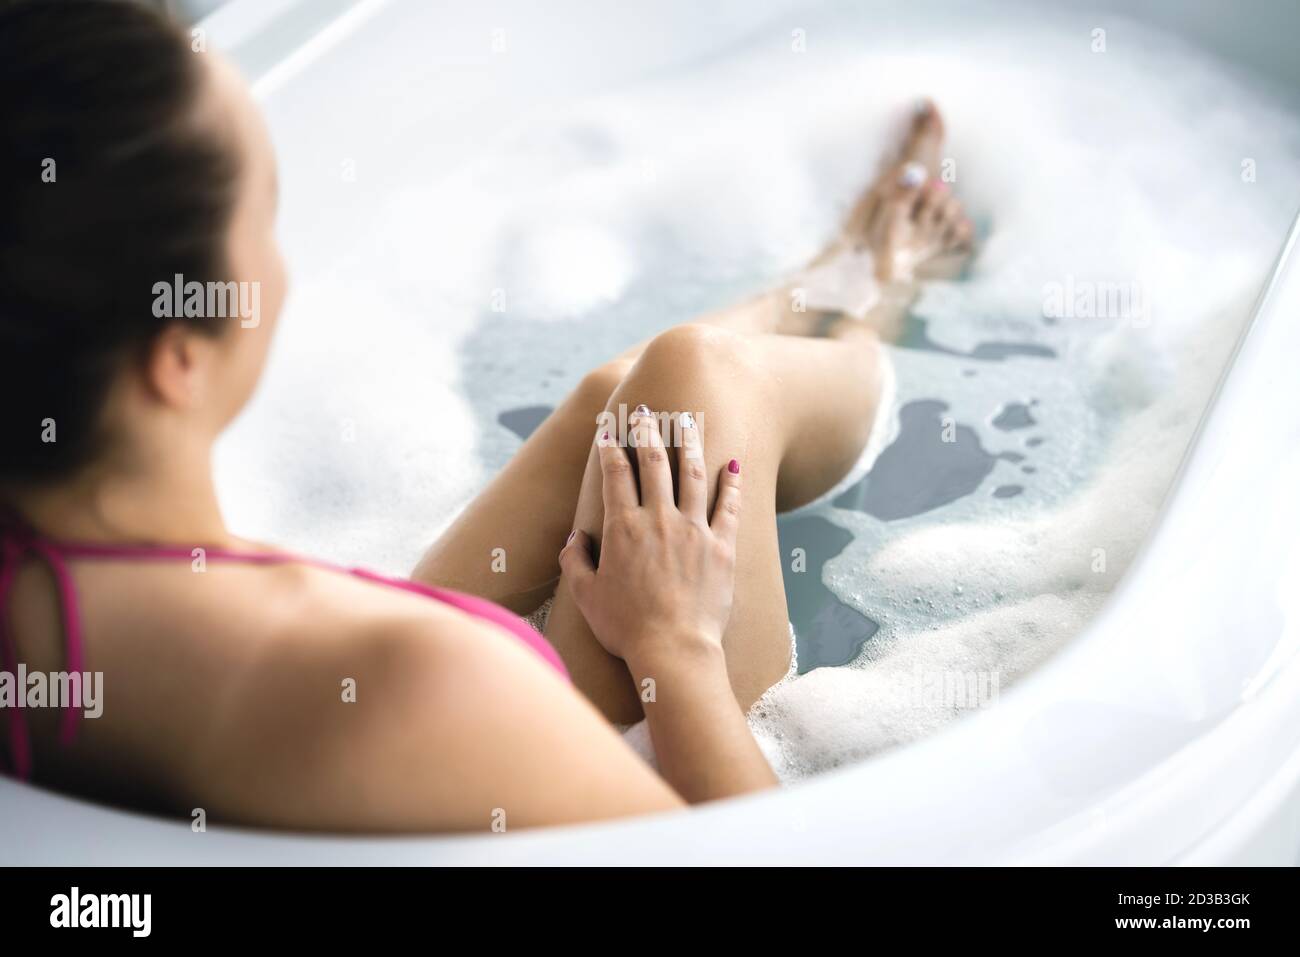 Woman in bath. Bathtub with bubbles and foam. Hand with nail polish in fingers after manicure. Clean and healthy skin. Skincare therapy and treatment. Stock Photo